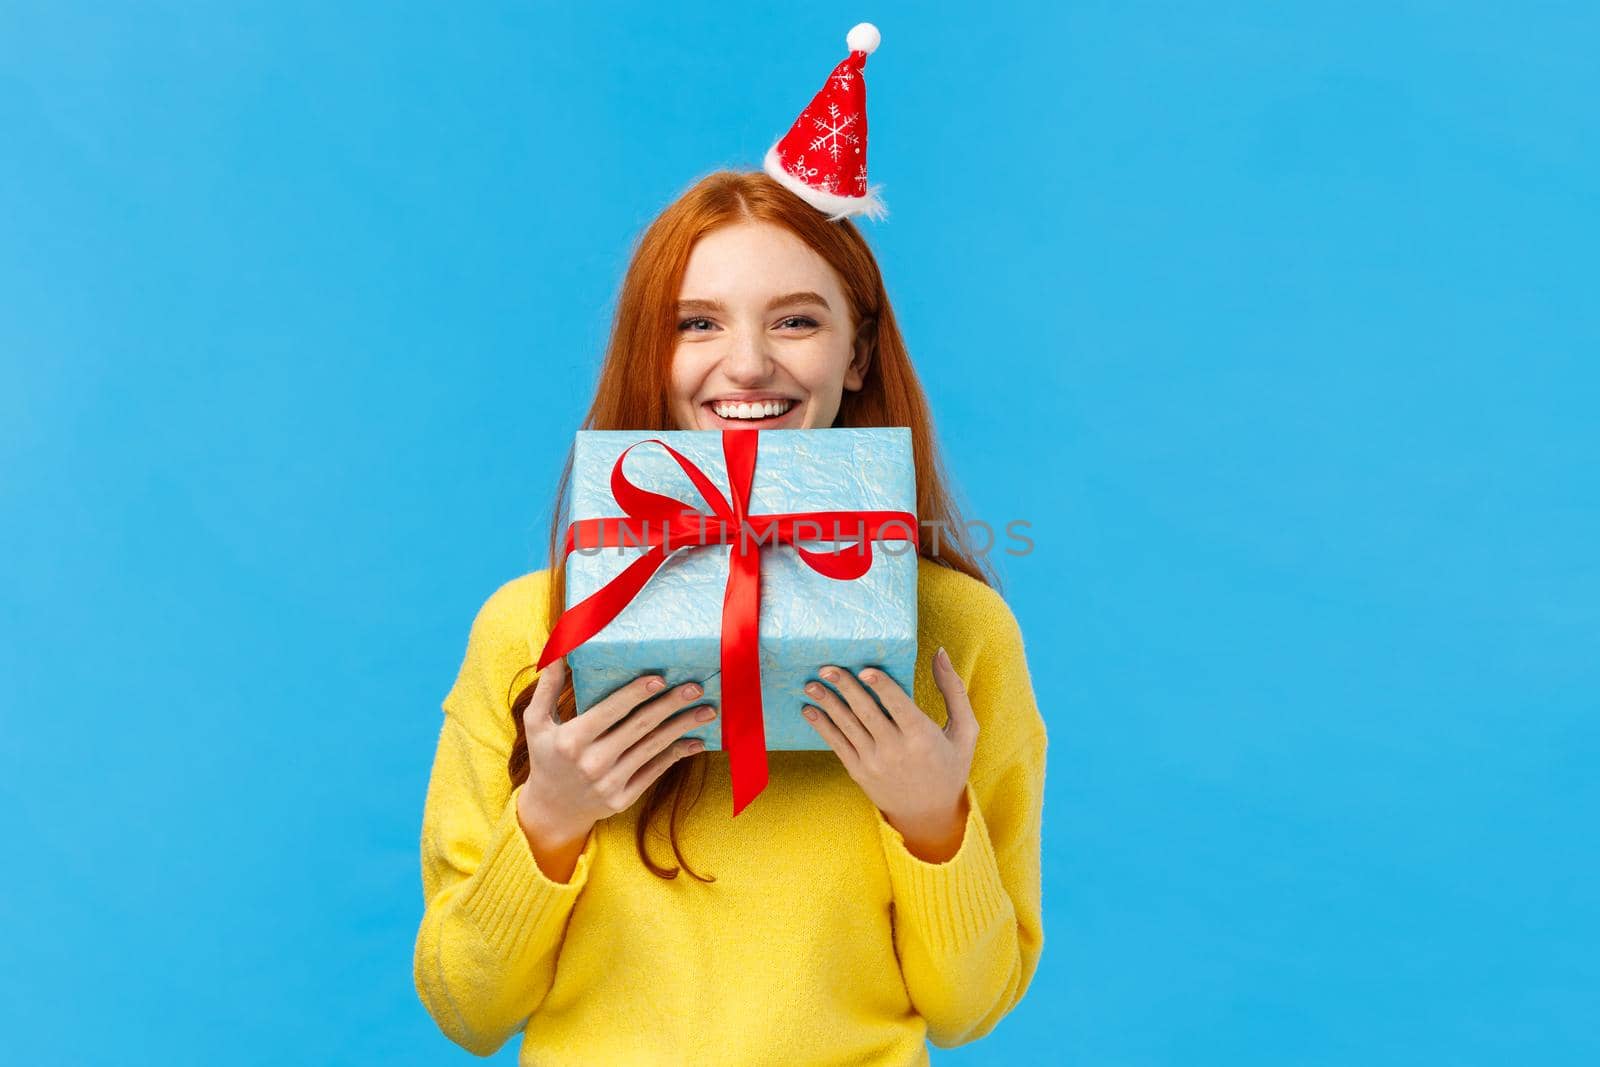 Girl cant wait give sibling her gift, smiling carry cute christmas wrapped present and wearing fancy santa hat, laughing, sharing positive emotions, attend winter holidays party, blue background.